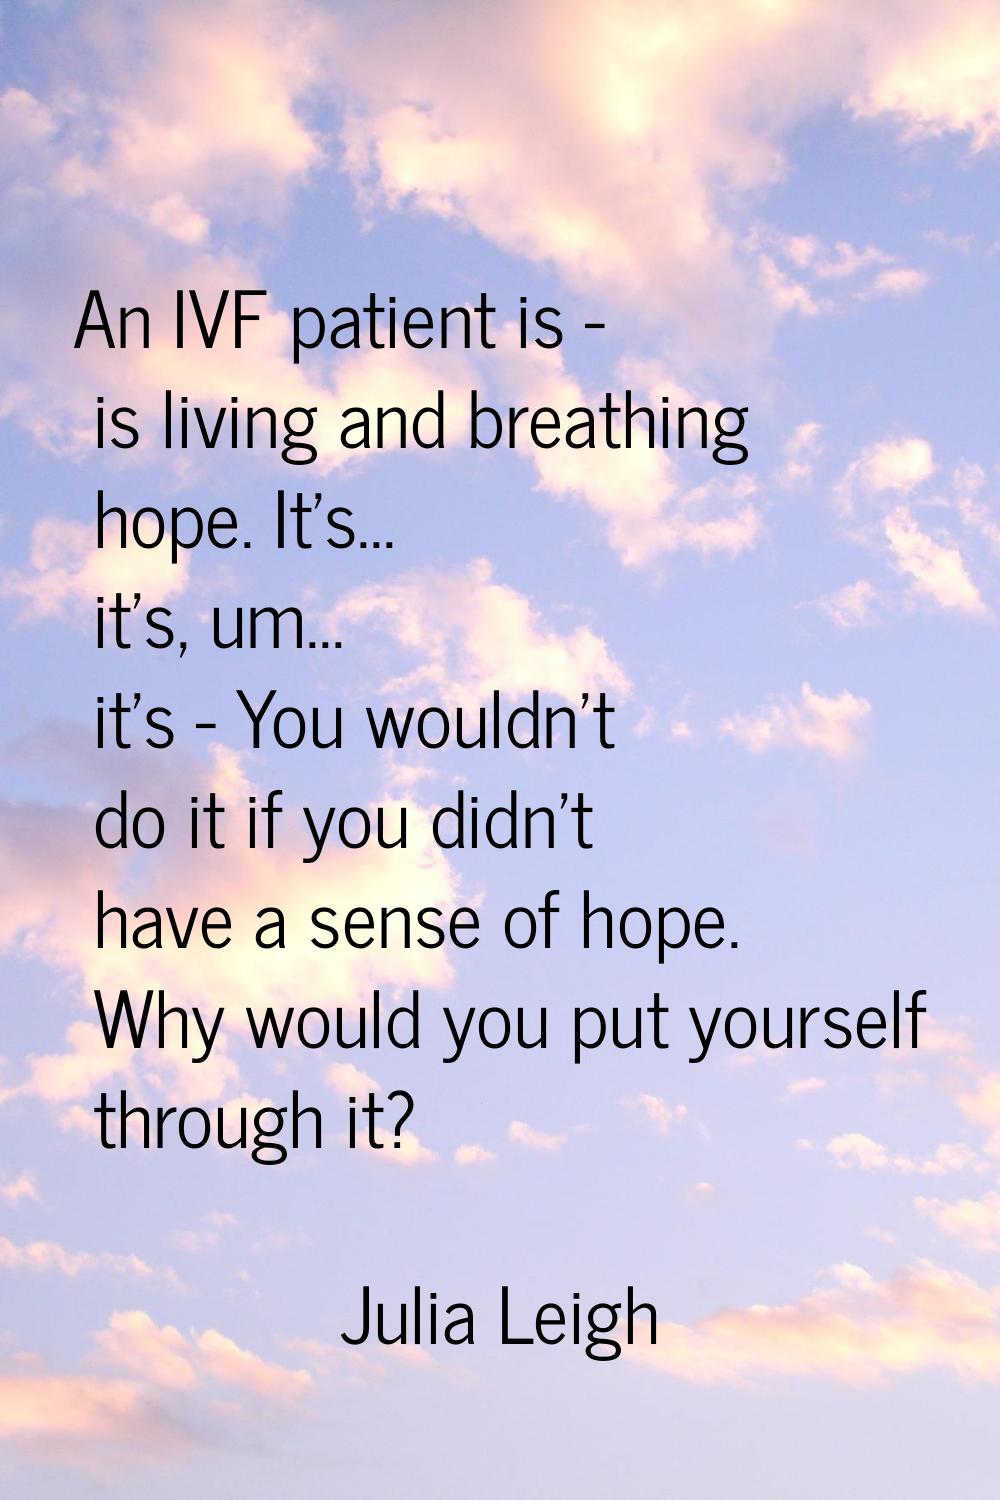 An IVF patient is - is living and breathing hope. It's... it's, um... it's - You wouldn't do it if 